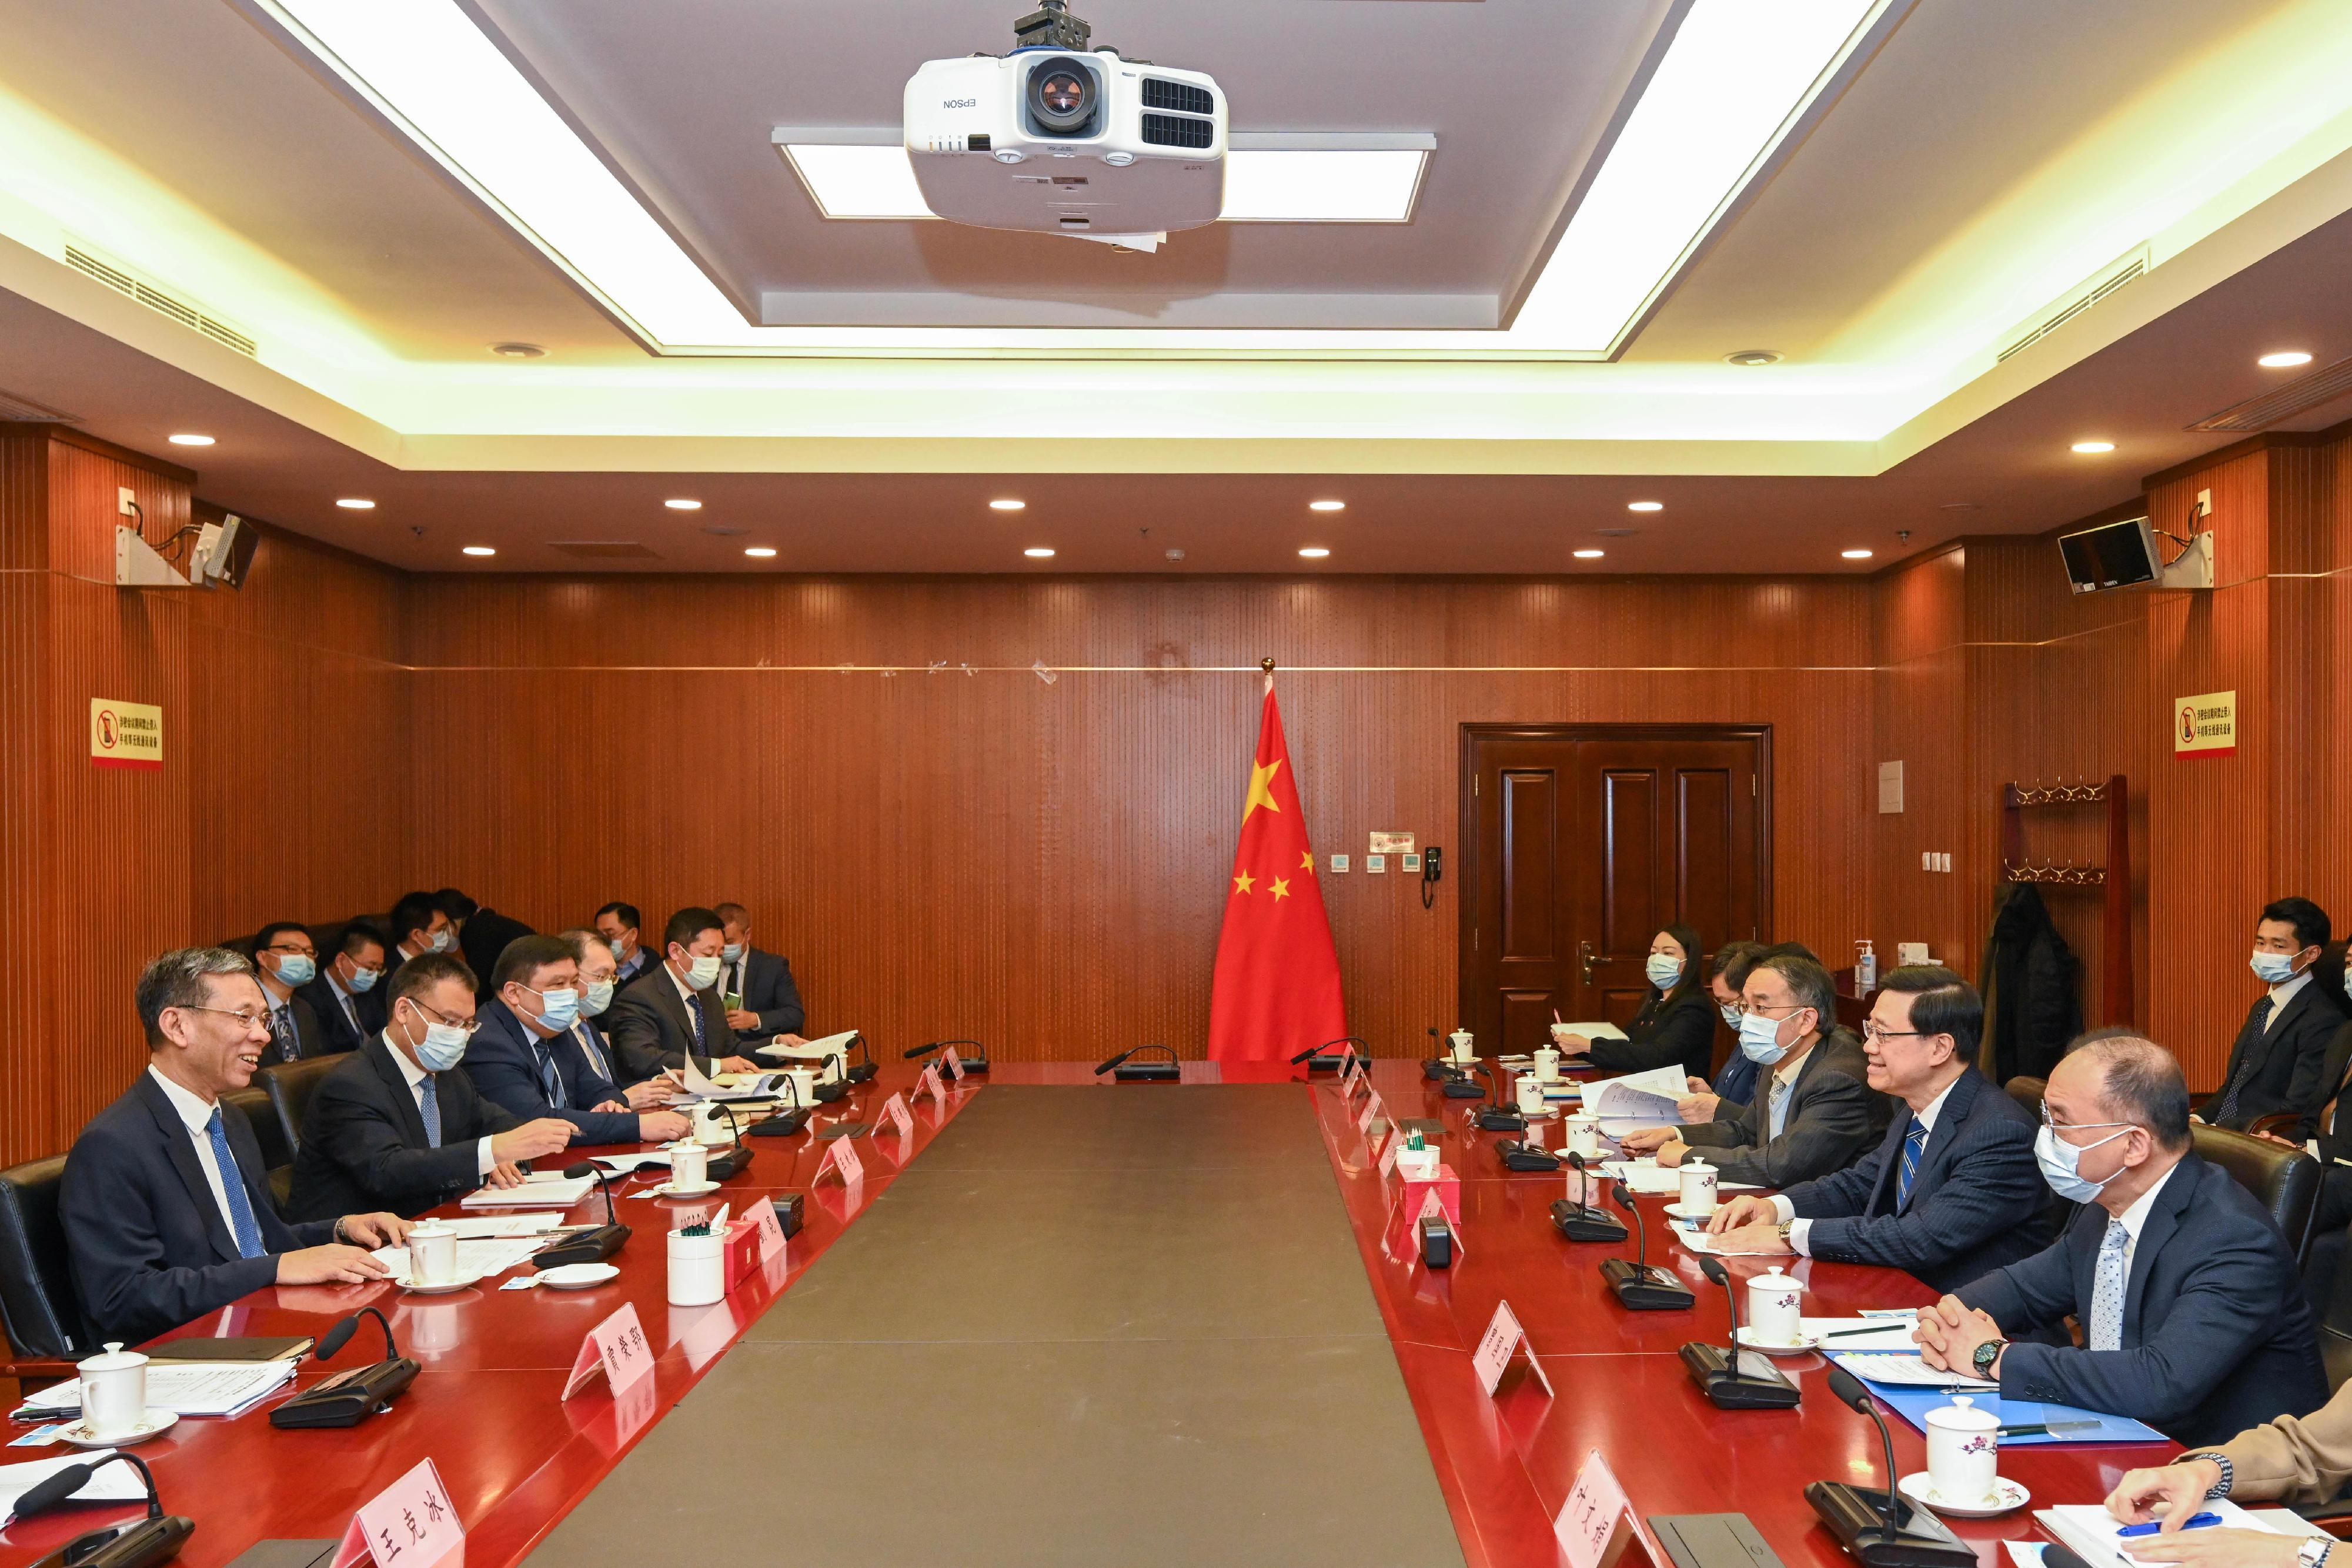 The Chief Executive, Mr John Lee (second right), meets with the Minister of Finance, Mr Liu Kun (first left), in Beijing this morning (March 14). Also joining the meeting are the Secretary for Constitutional and Mainland Affairs, Mr Erick Tsang Kwok-wai (first right), and the Secretary for Financial Services and the Treasury, Mr Christopher Hui (third right). 